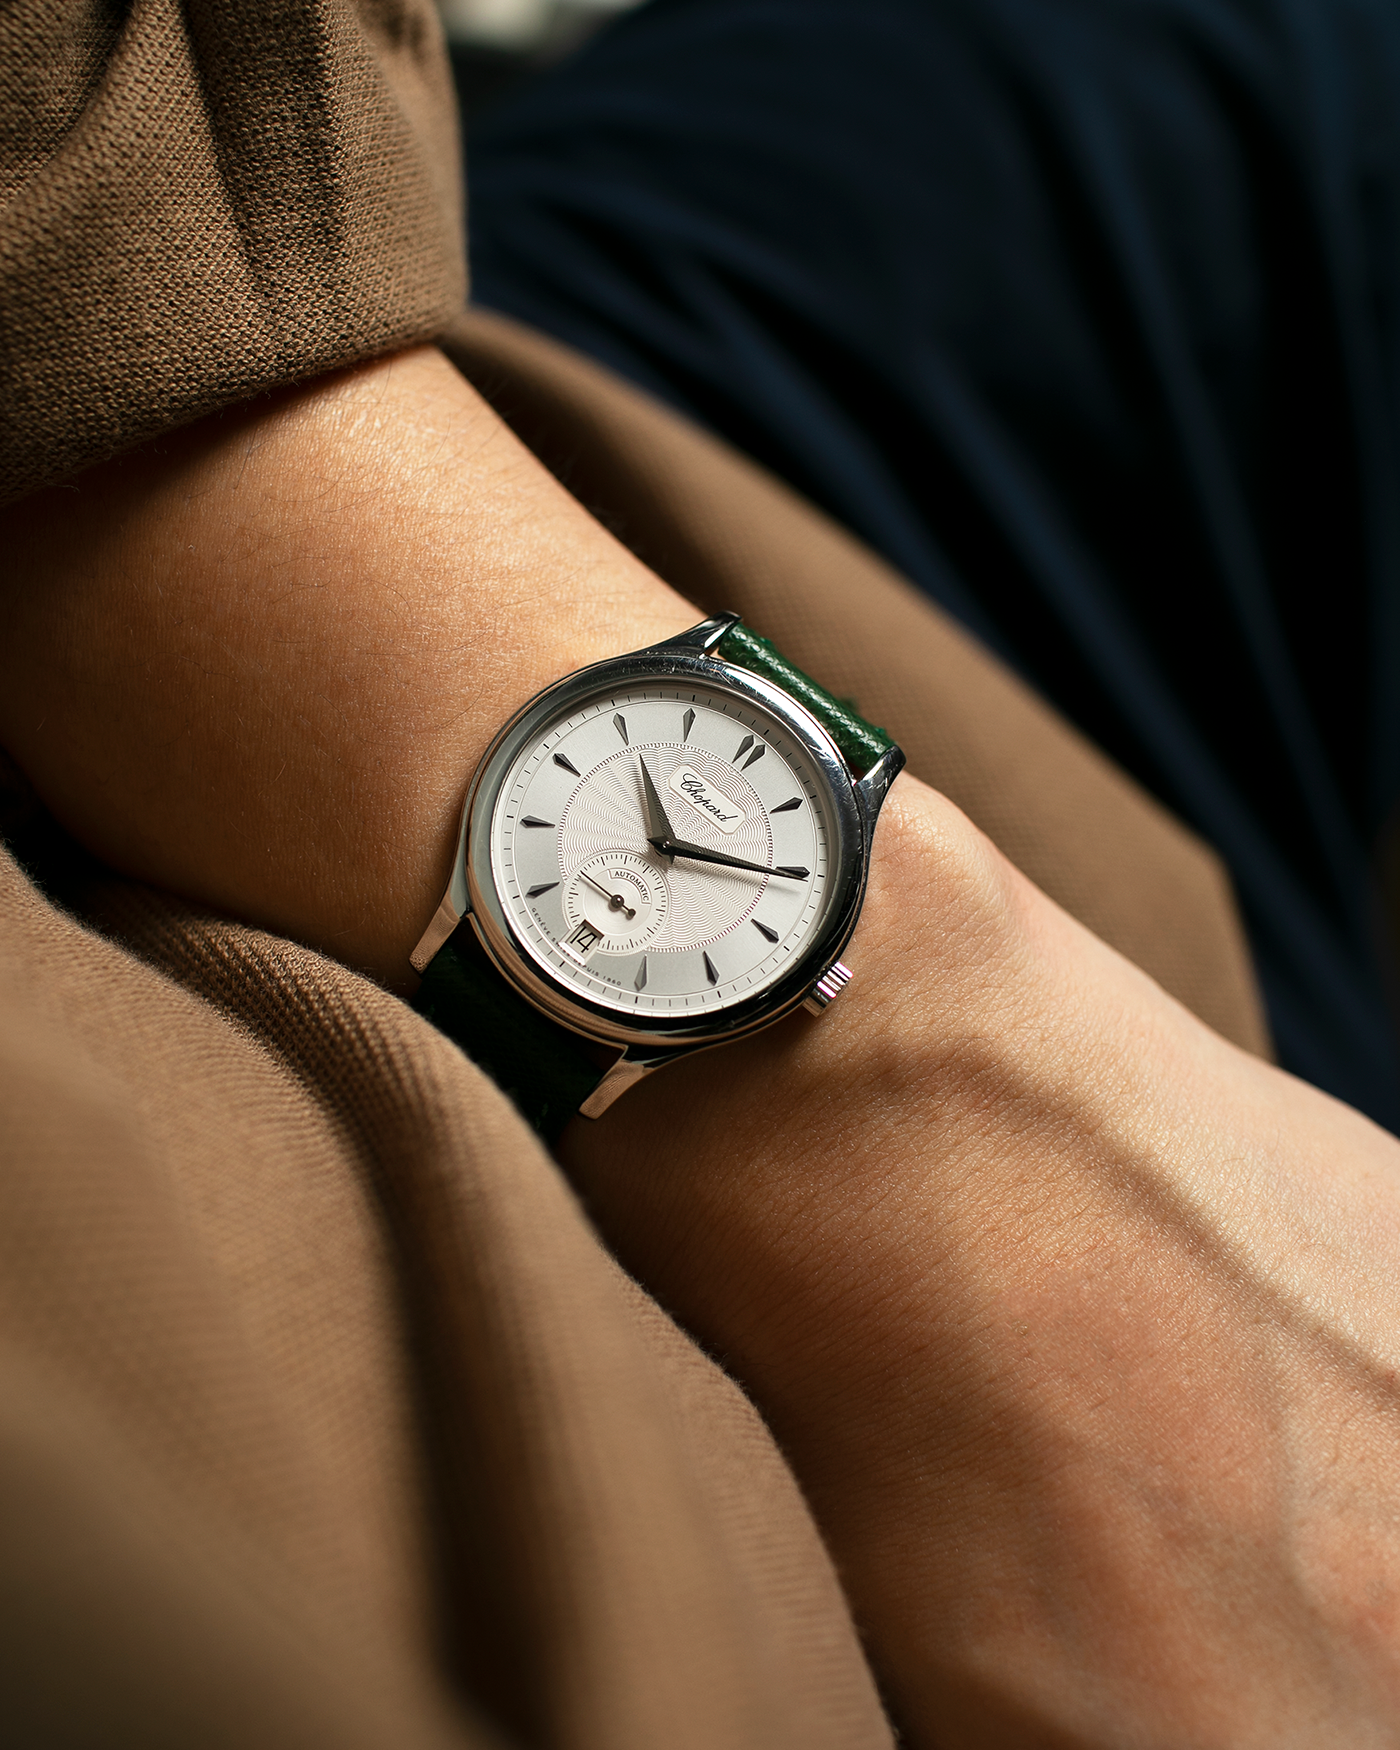 Brand: Chopard L.U.C. Year: 1990’s Model: 16/1860/2 Material: 18k White Gold Movement: In-House Caliber 1.96 Case Diameter: 37mm Strap: Hunter Green Molequin Textured Calf and 18k White Gold Chopard Tang Buckle